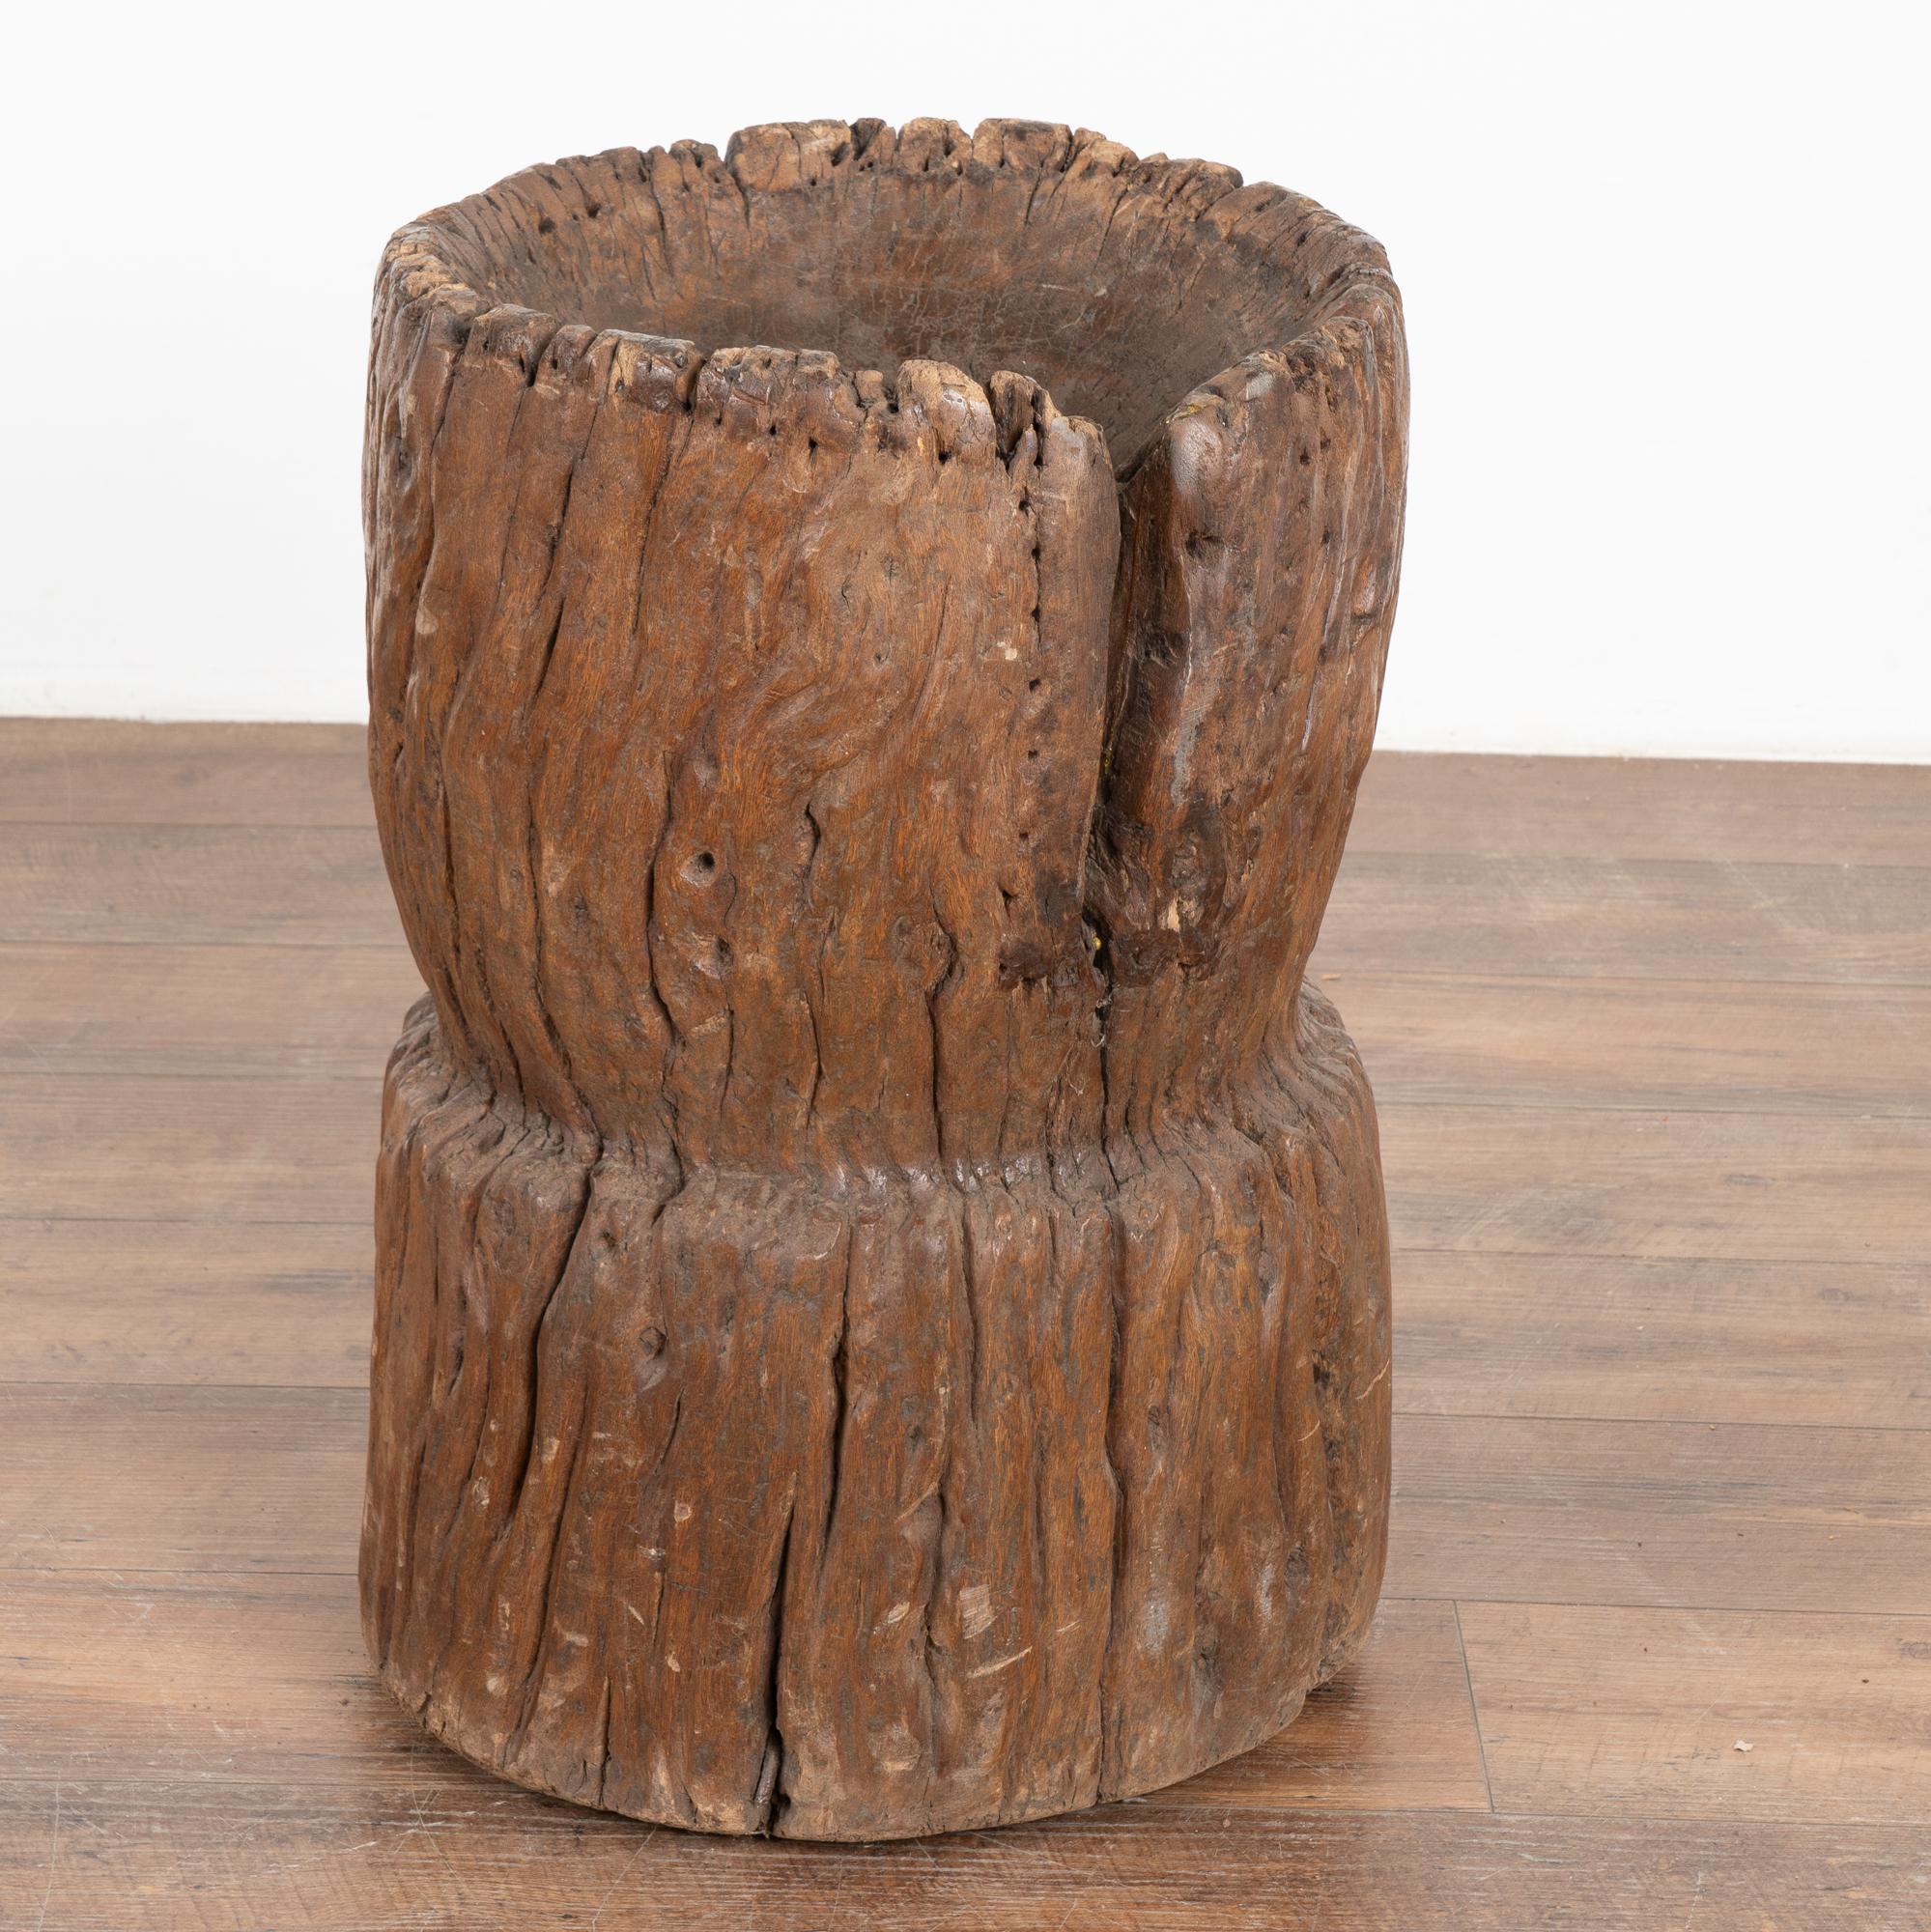 Wood Sculpture Container from Old Water Mill Gear, China 1820-40 For Sale 3